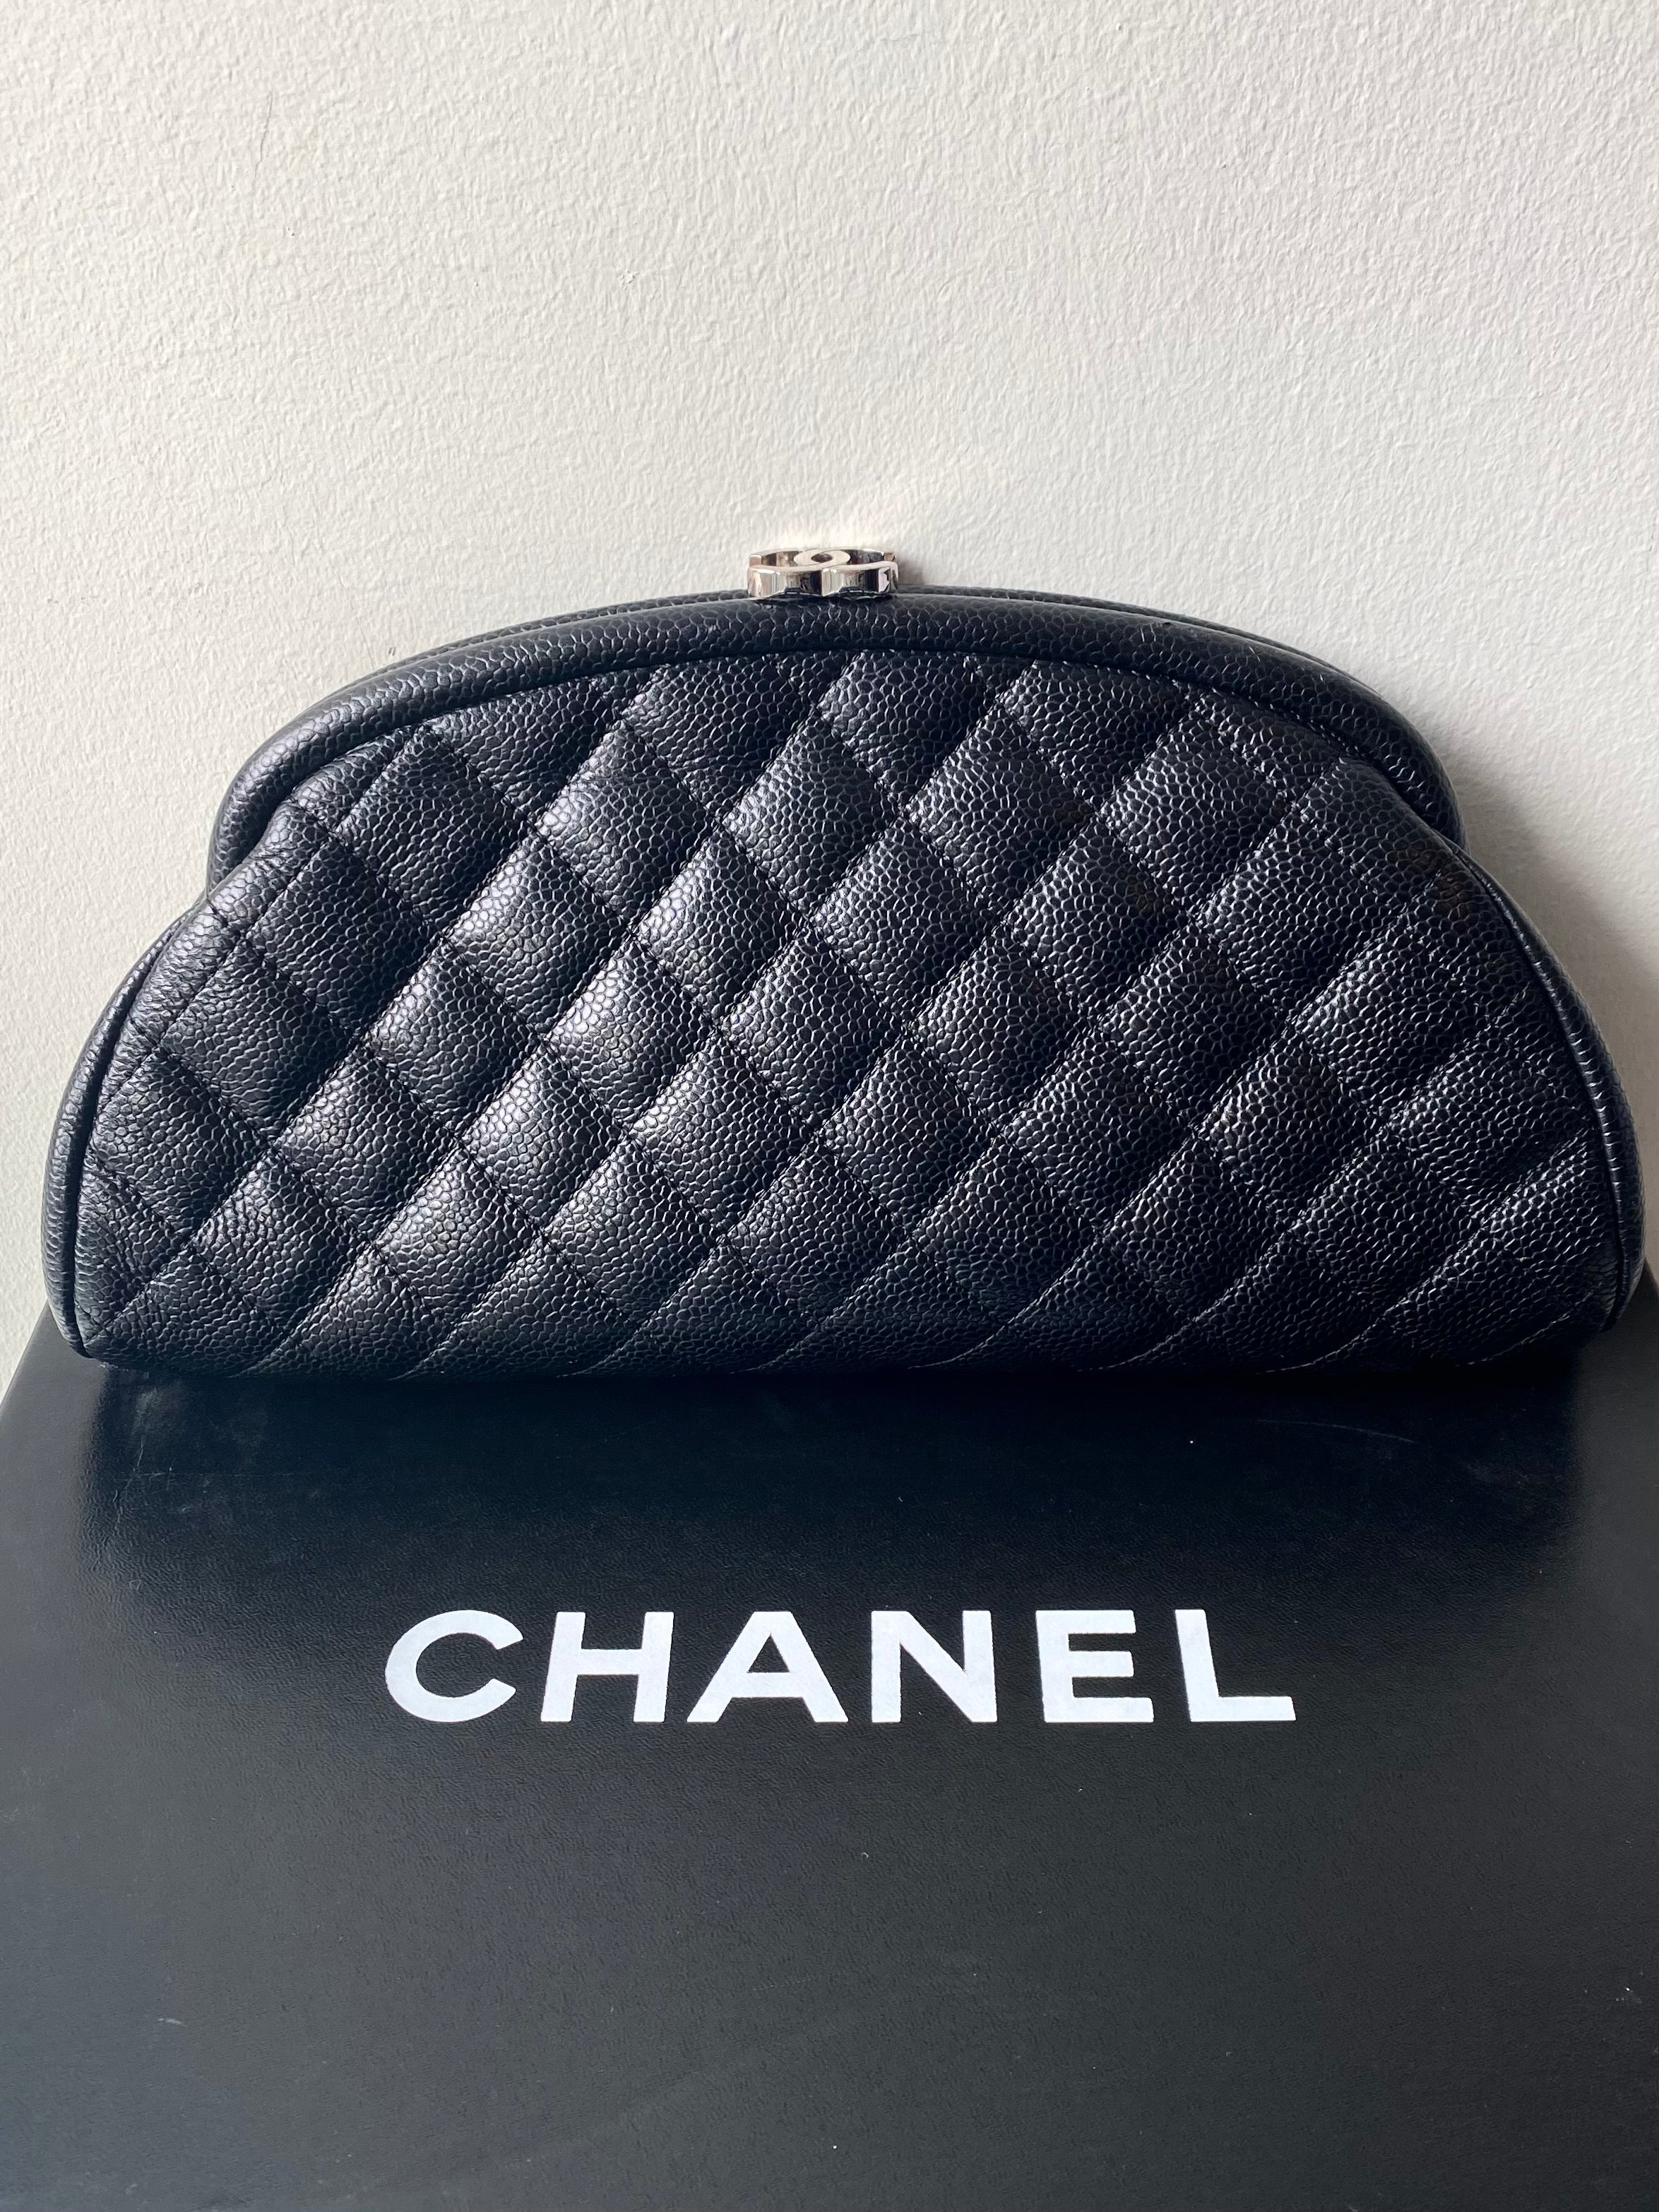 Chanel quilted caviar timeless clutch.